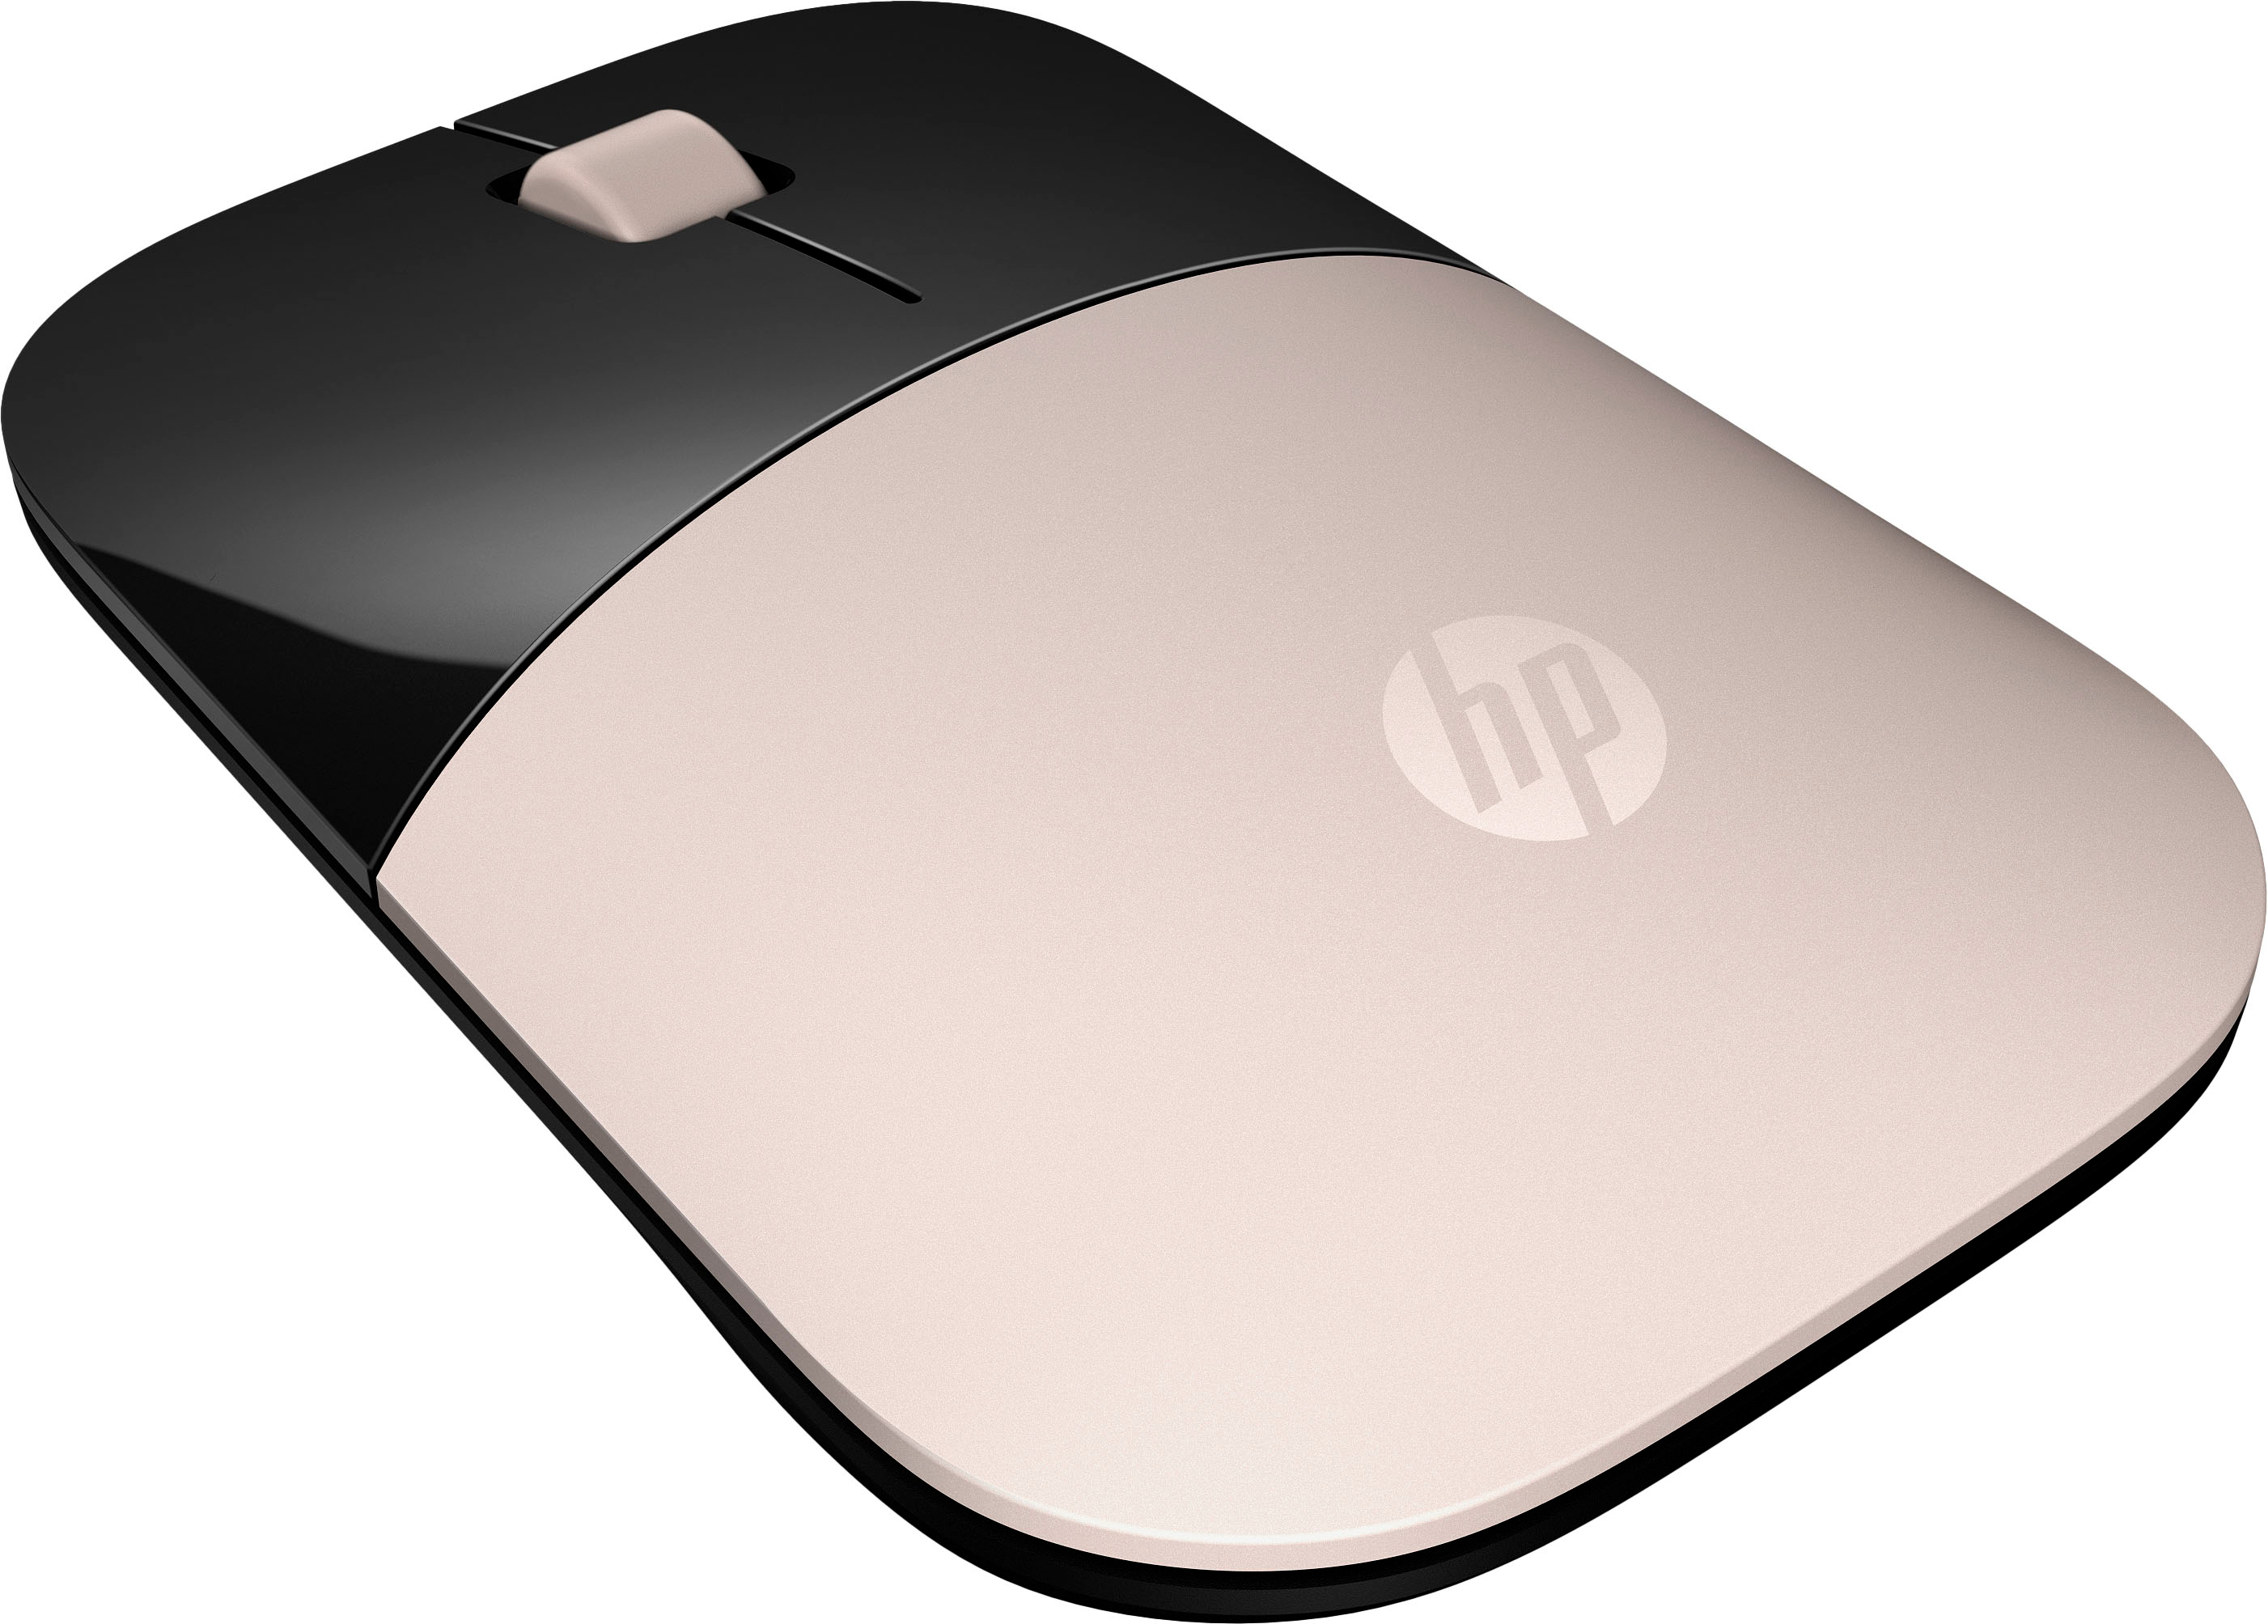 Best Buy: HP Z3700 G2 Wireless Optical Ambidextrous Mouse Rose Gold  66Z12AA#ABL